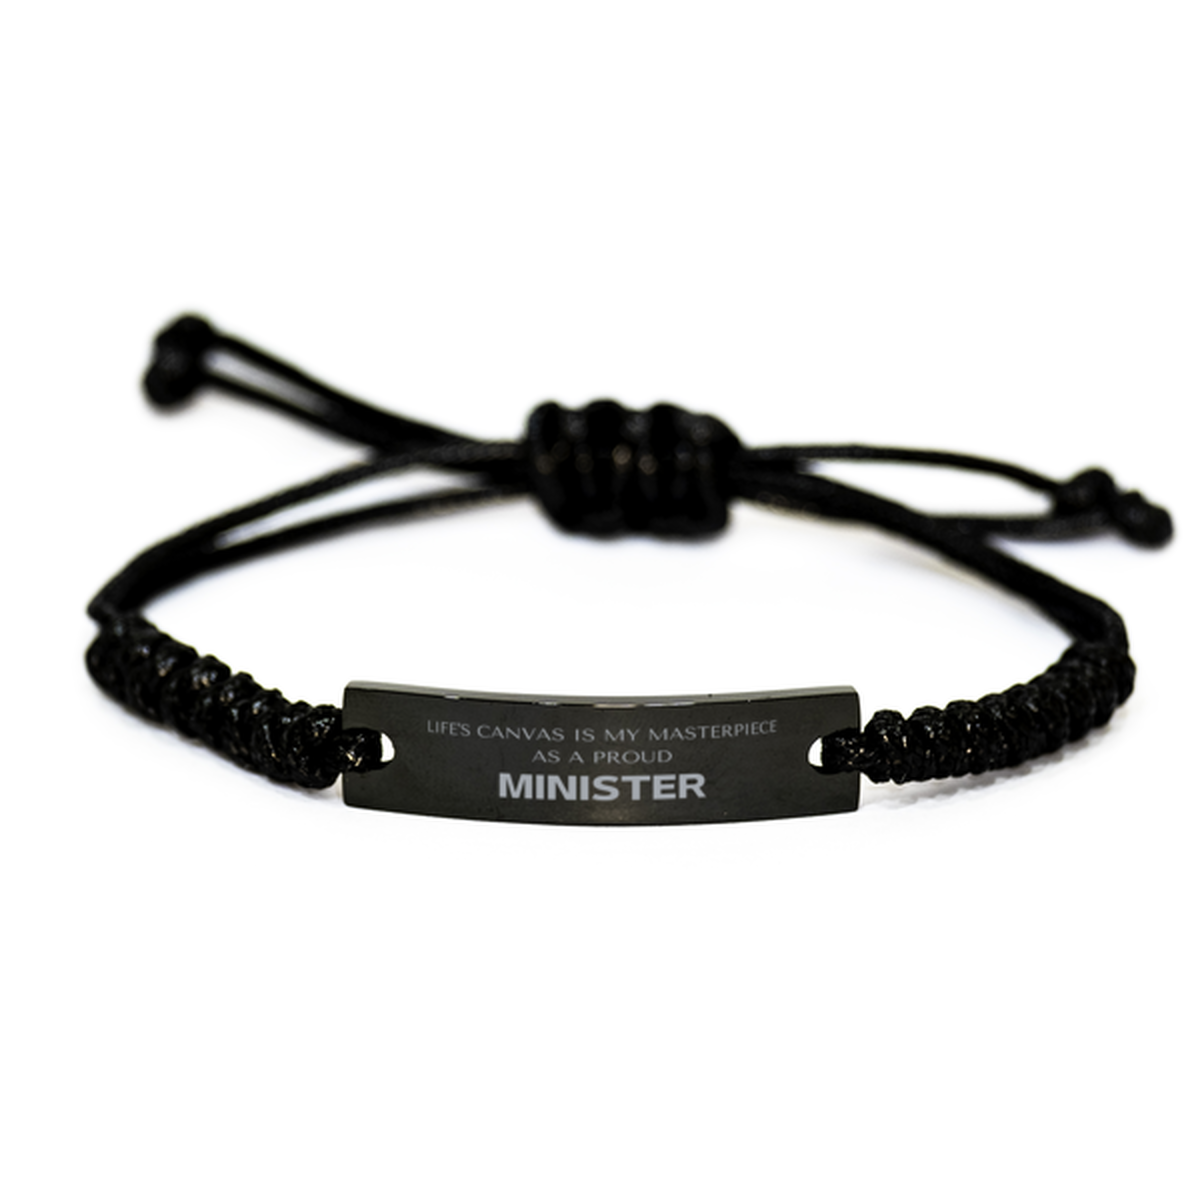 Proud Minister Gifts, Life's canvas is my masterpiece, Epic Birthday Christmas Unique Black Rope Bracelet For Minister, Coworkers, Men, Women, Friends